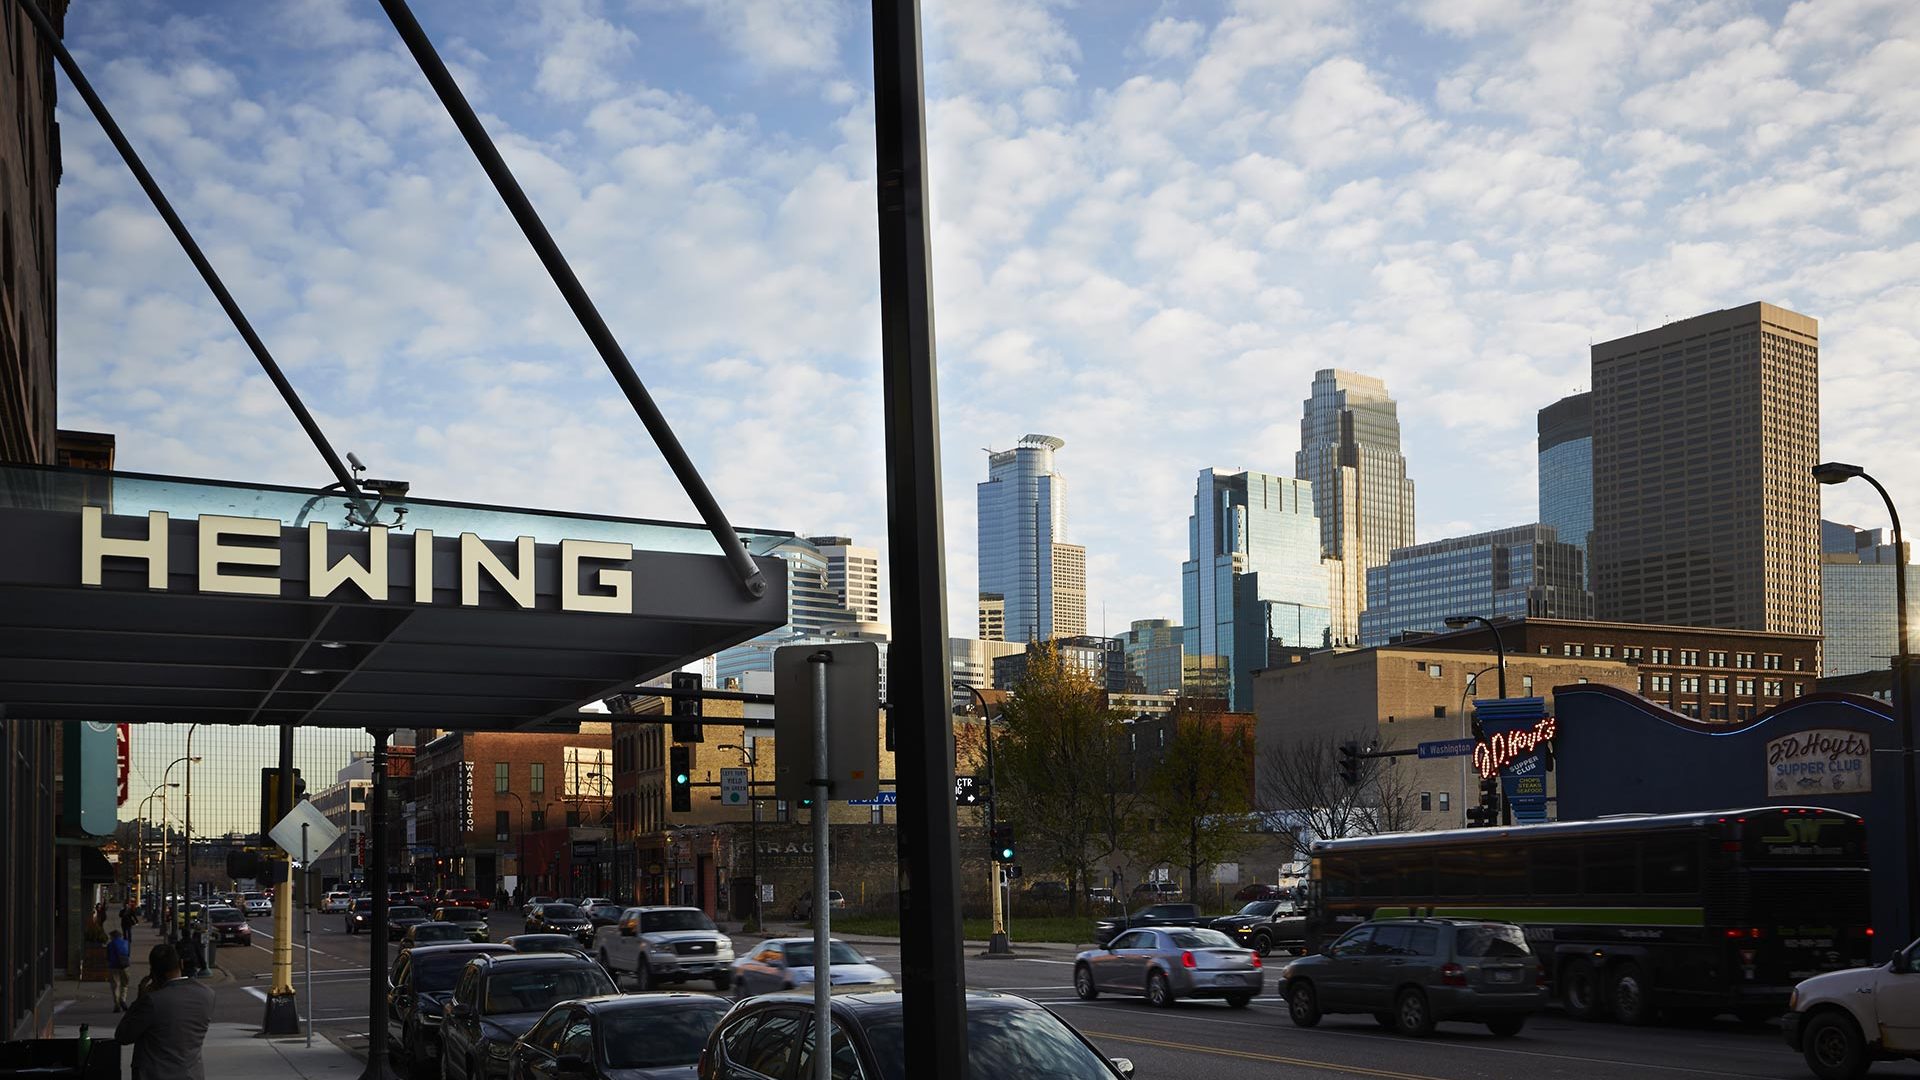 Entrance sign for Hewing Hotel and the MPLS, MN downtown skyline